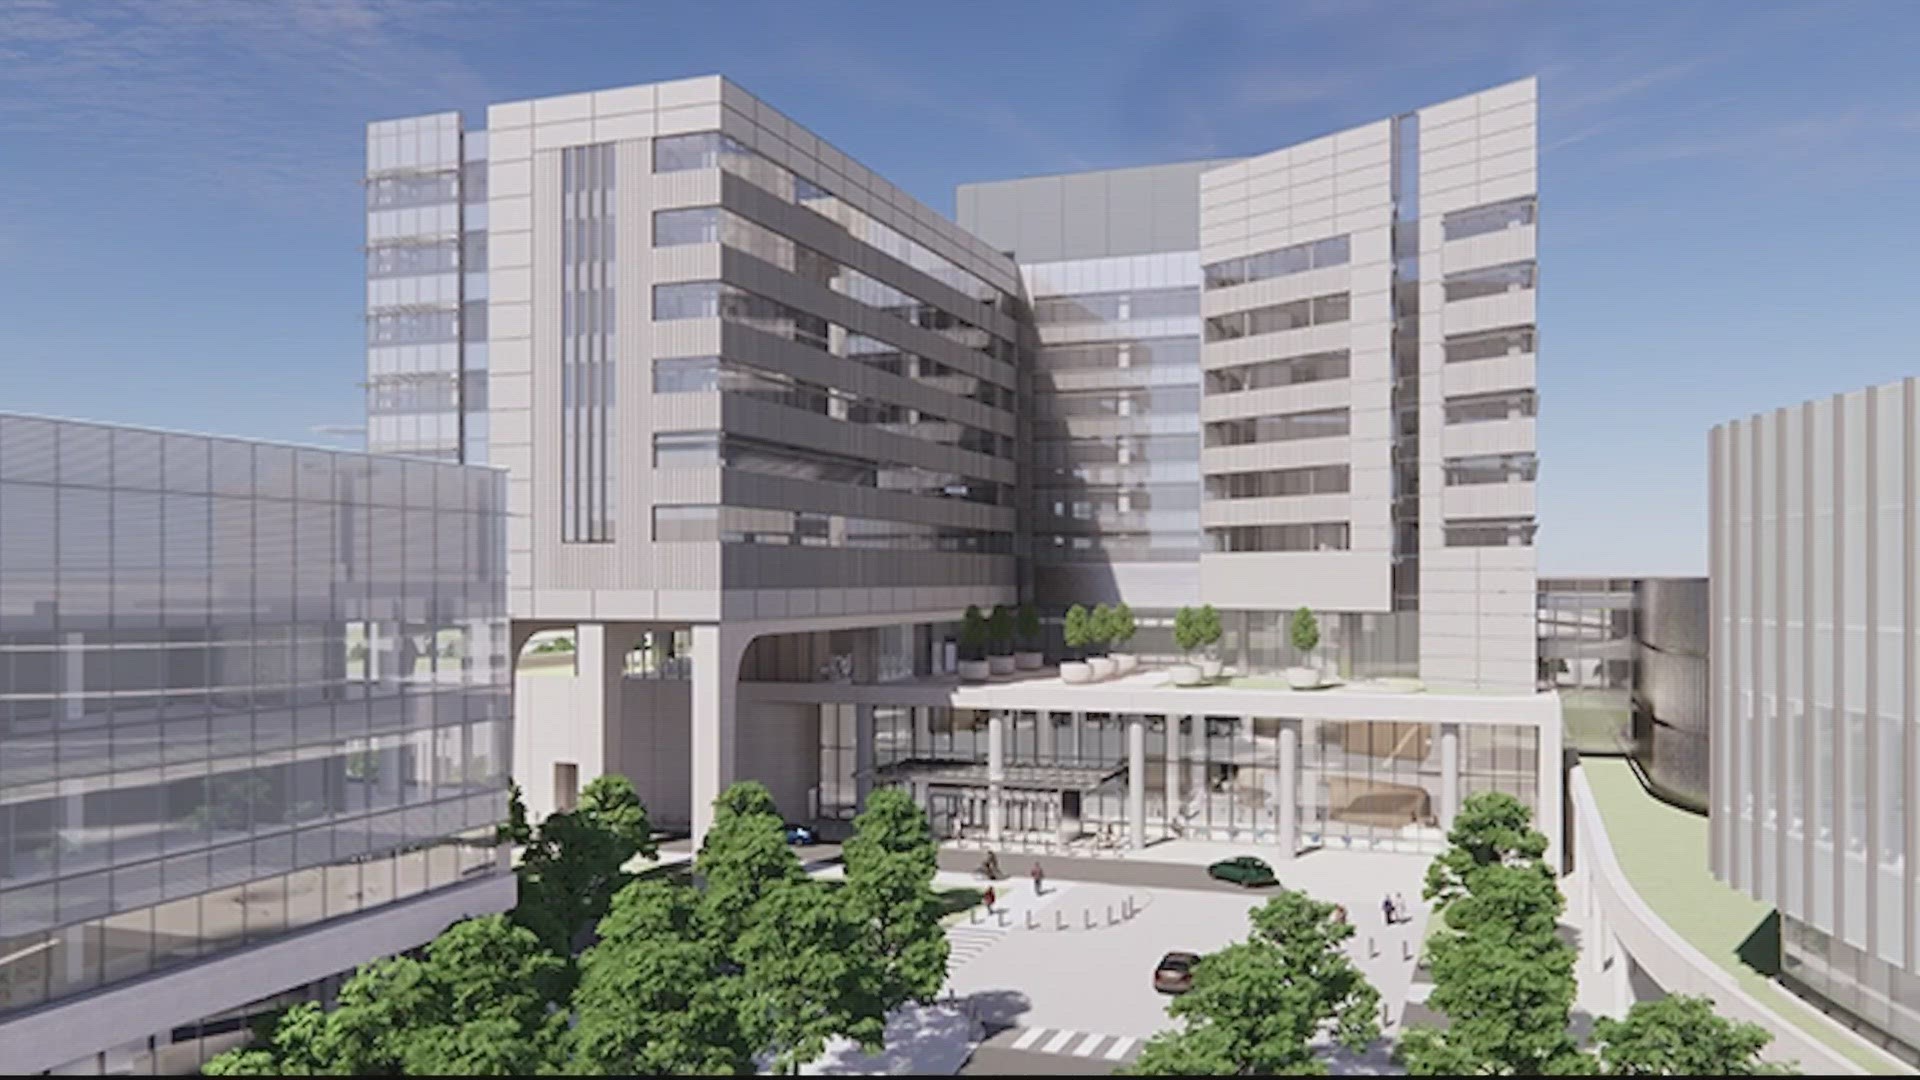 Council members unanimously voted to build a new hospital, cancer care center and specialty care center at the old Landmark Mall site.